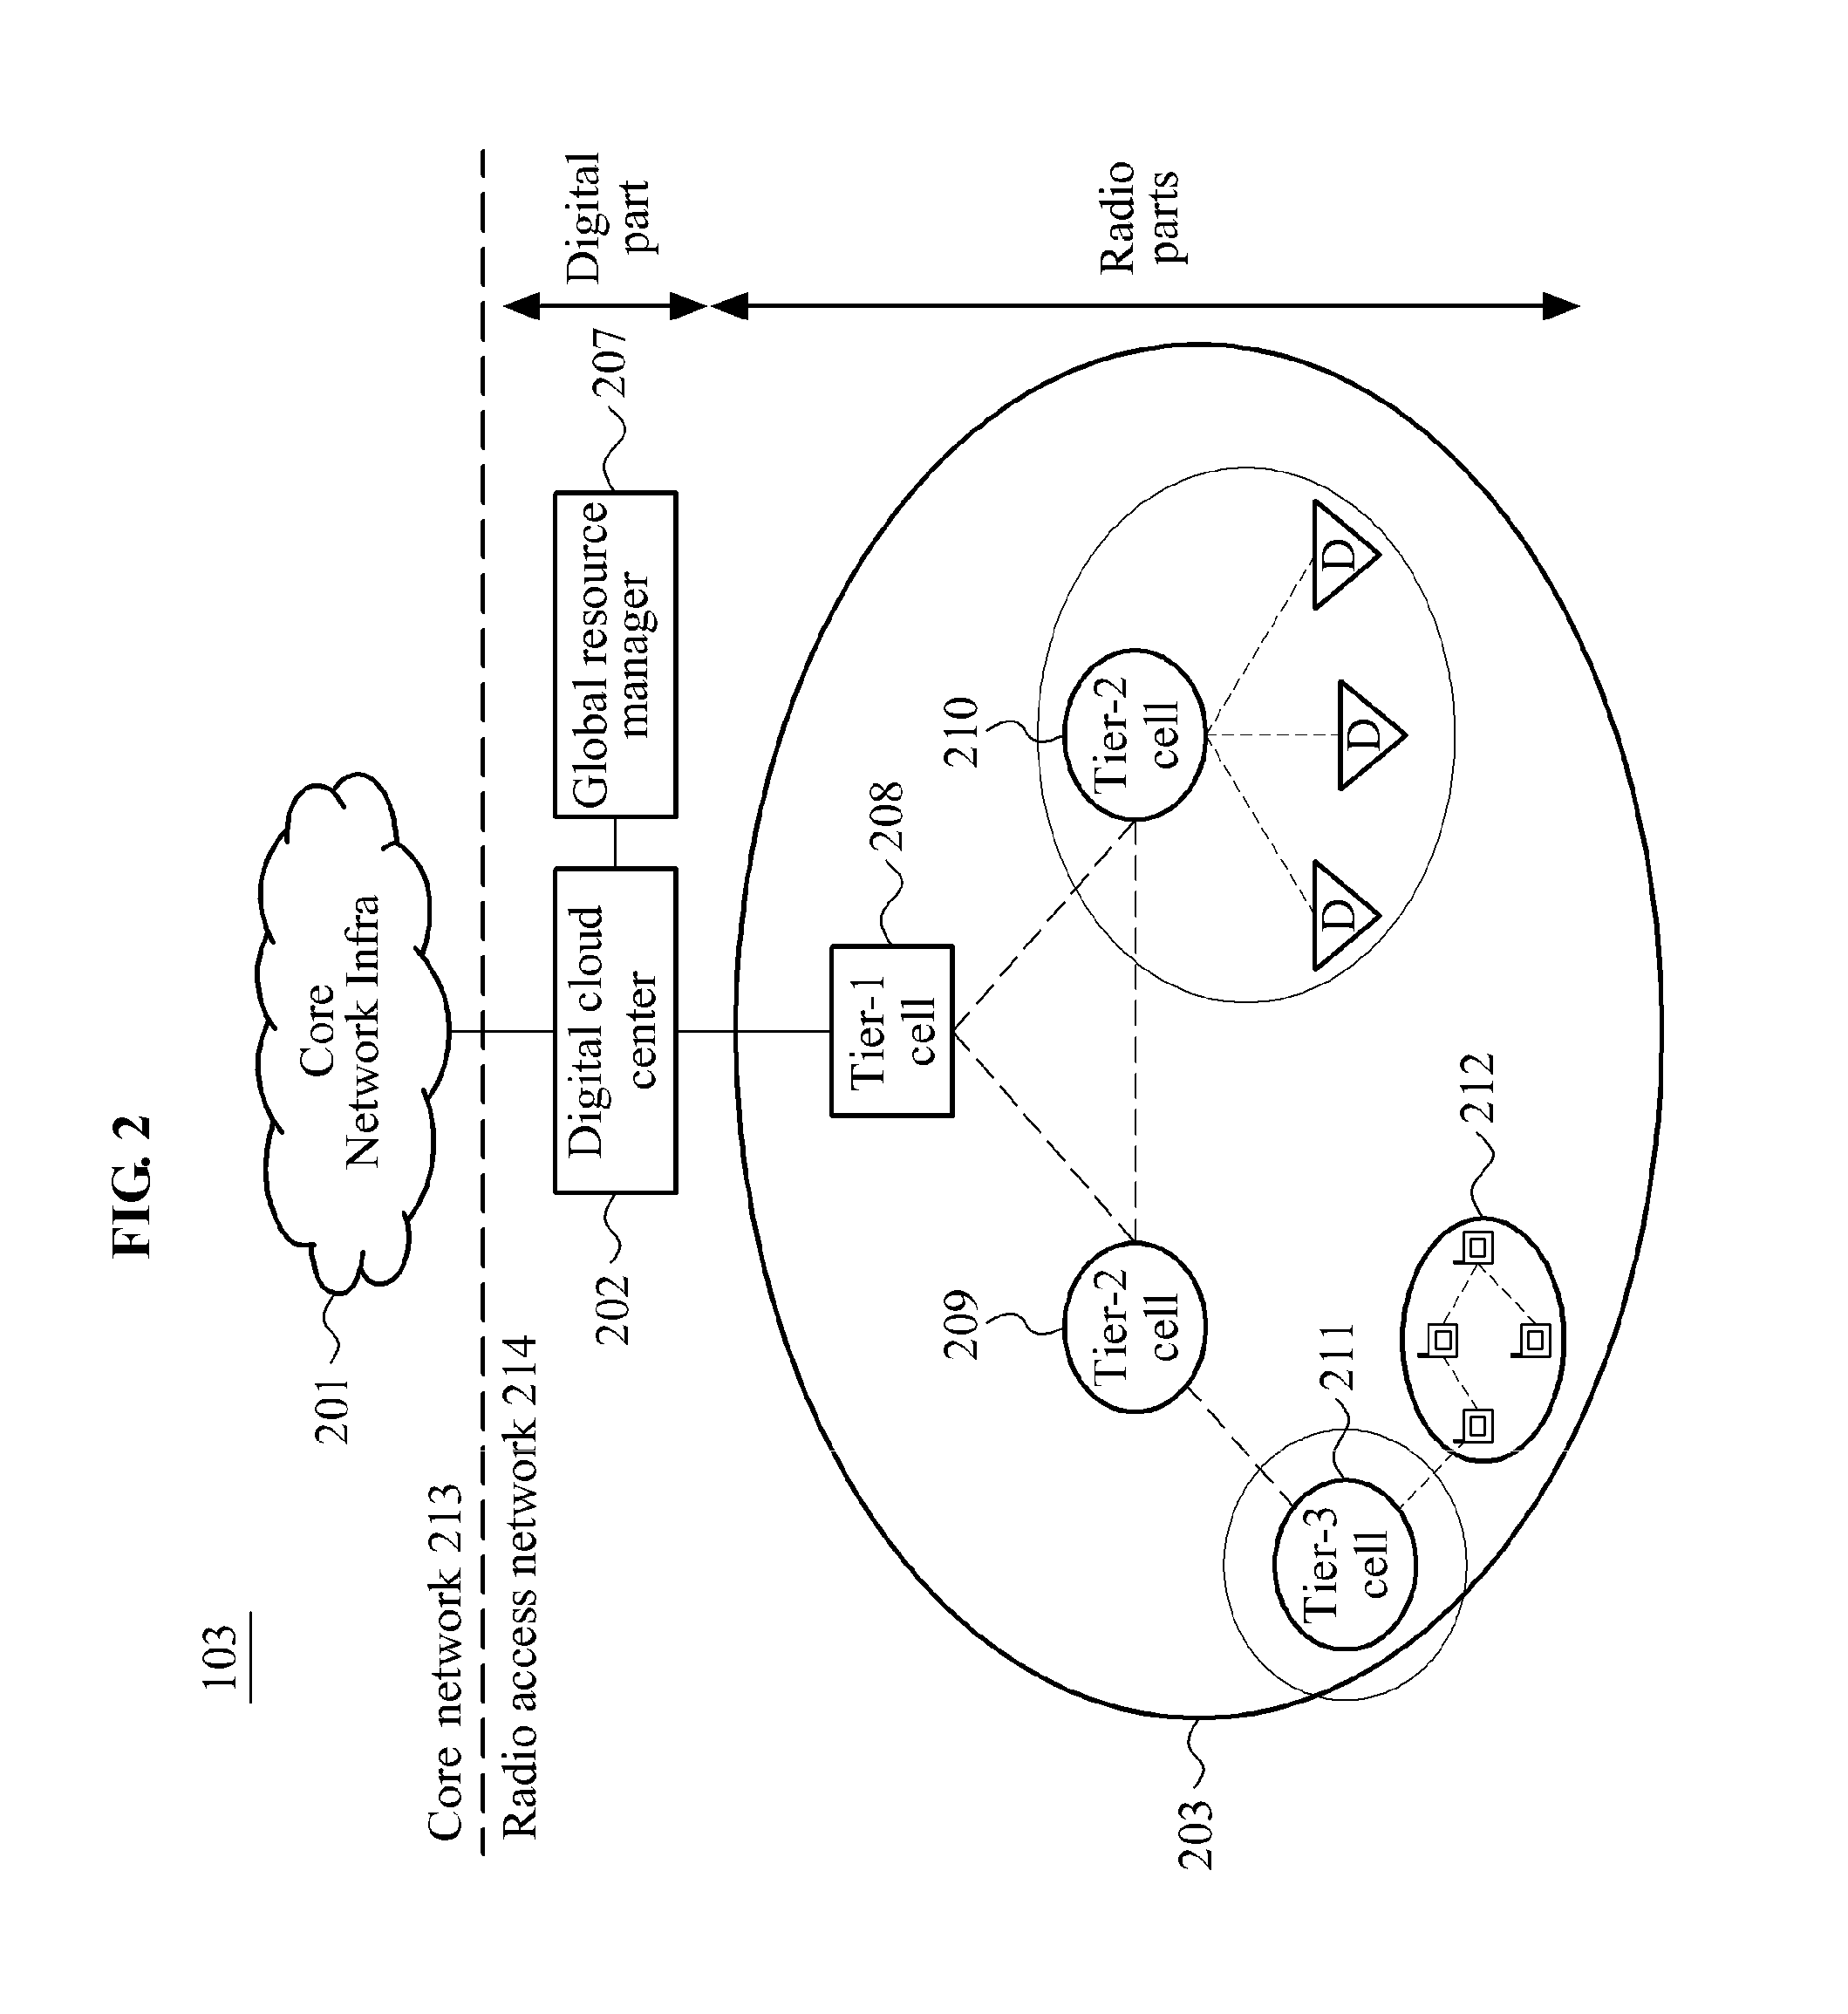 System and method for multi-hierarchical cell configuration